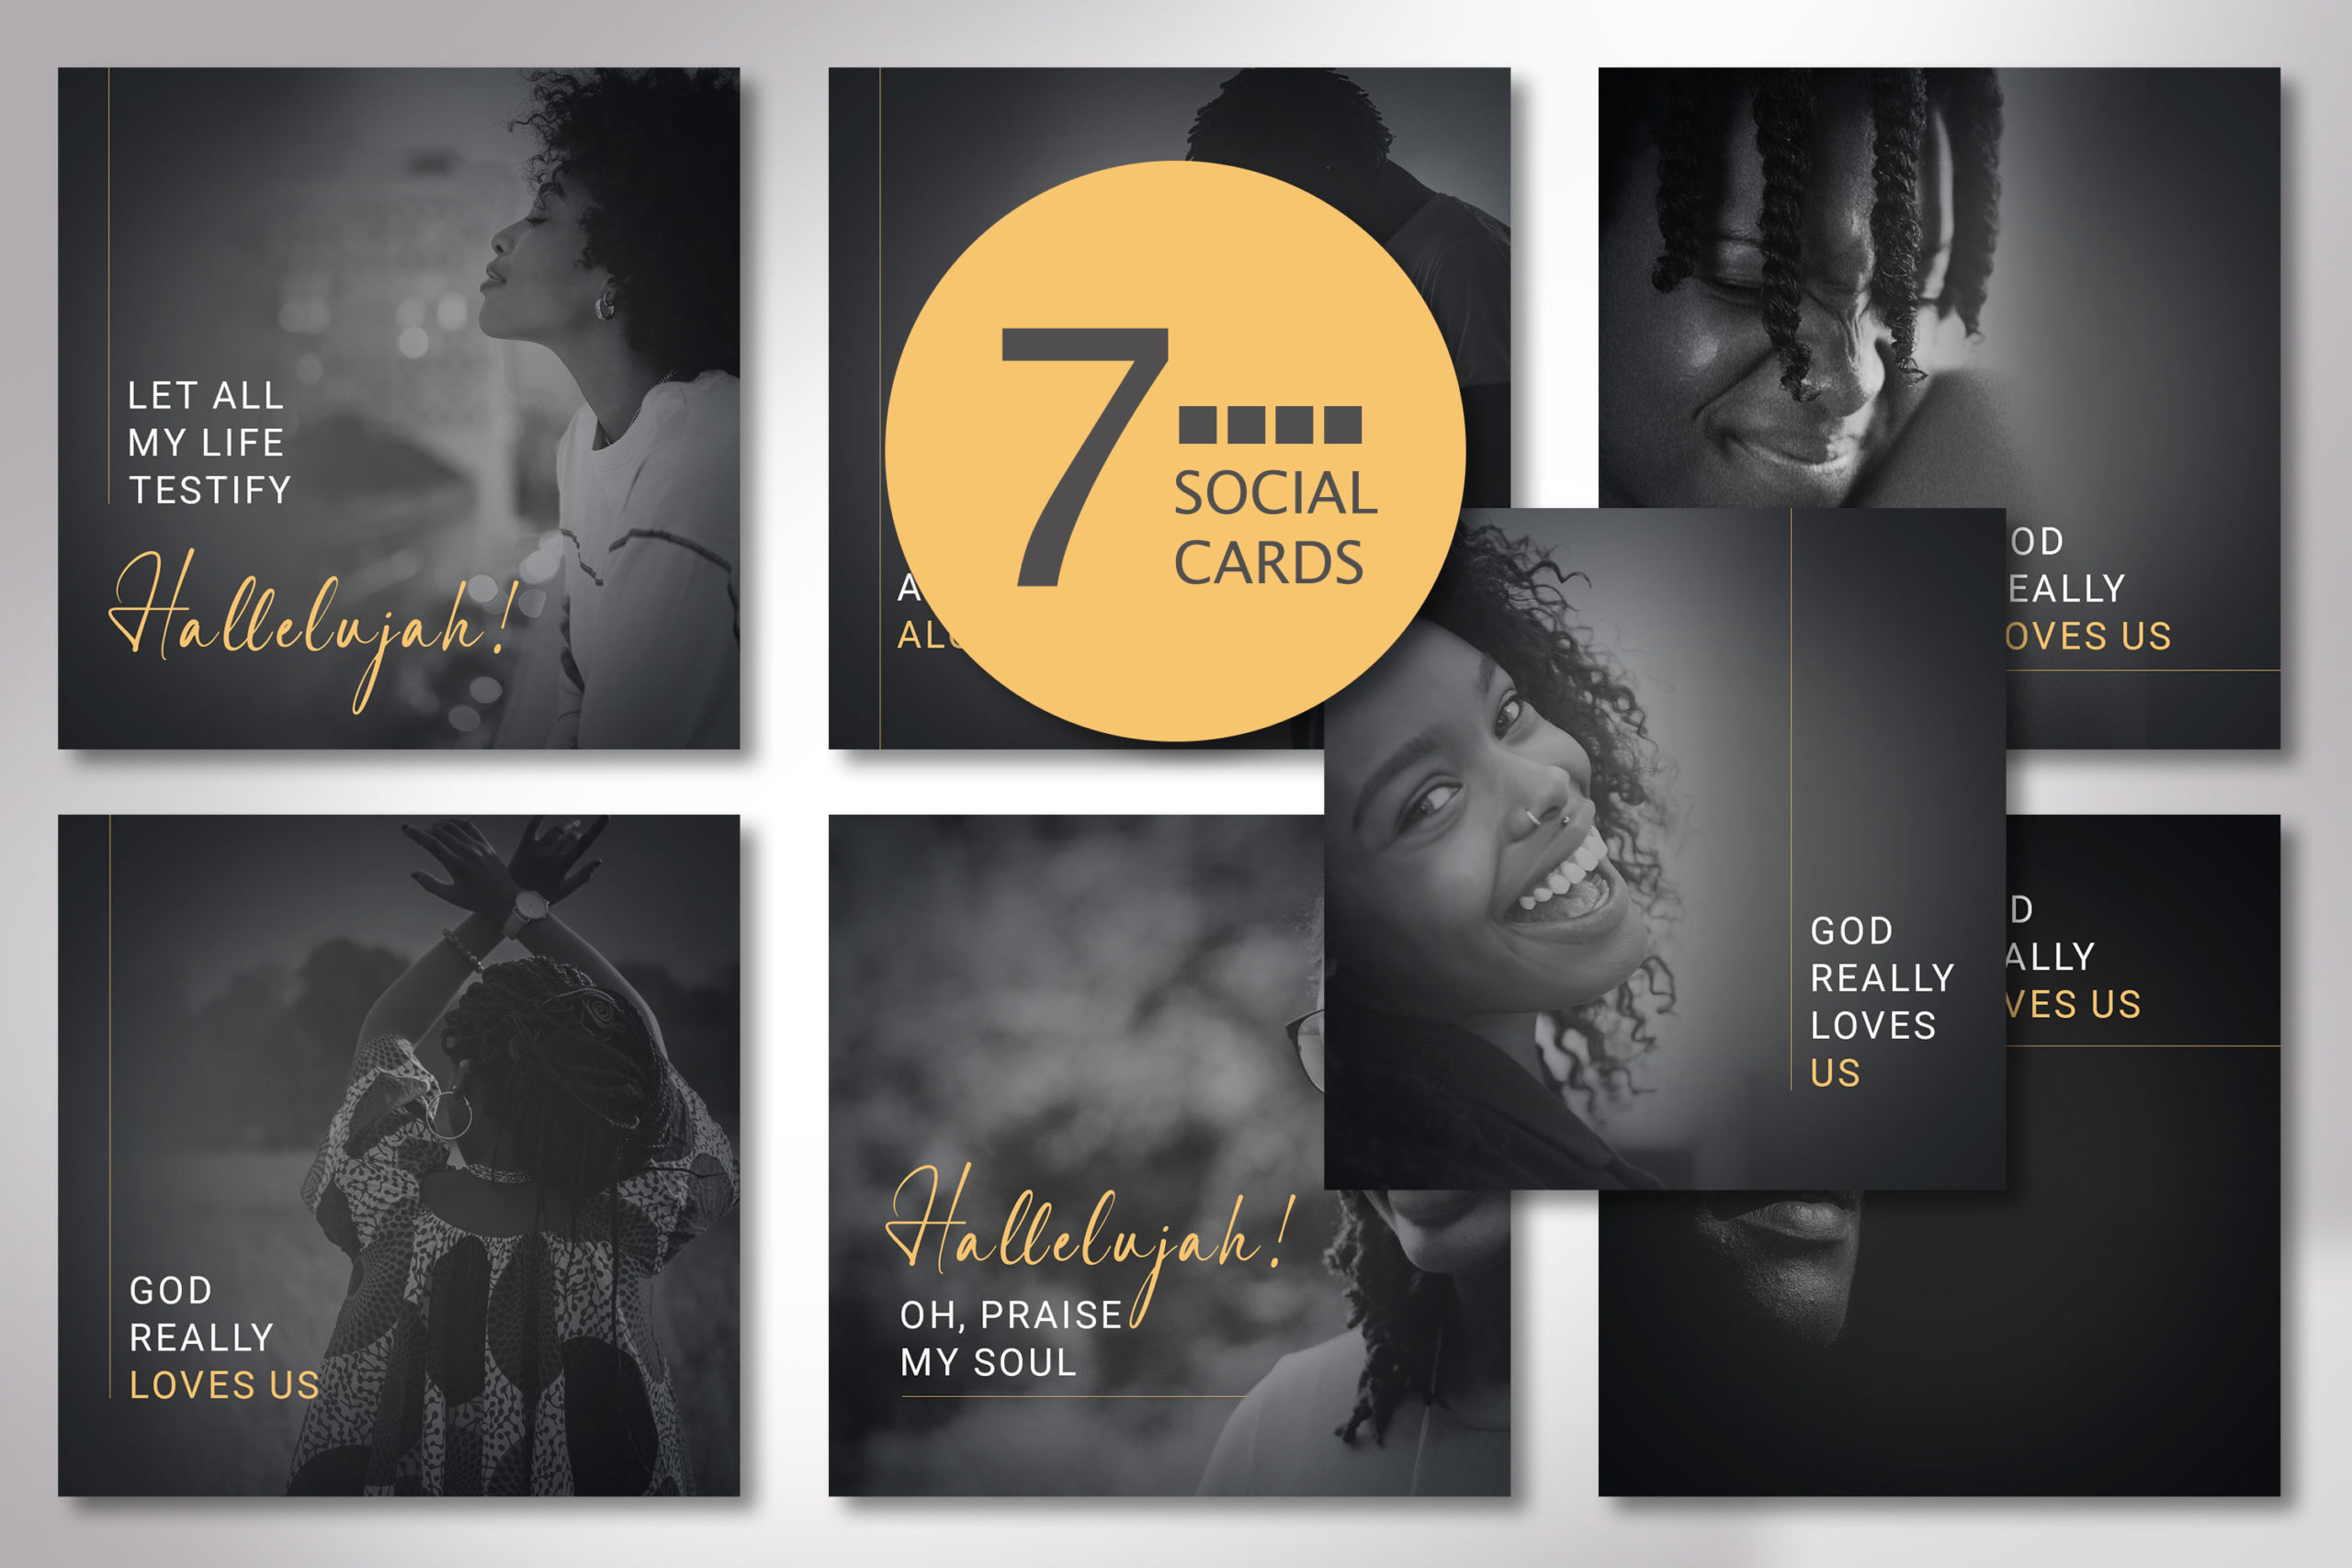 Social Media Card set for the lyrics from God Really Loves Us by Dante Bowe and David Crowder